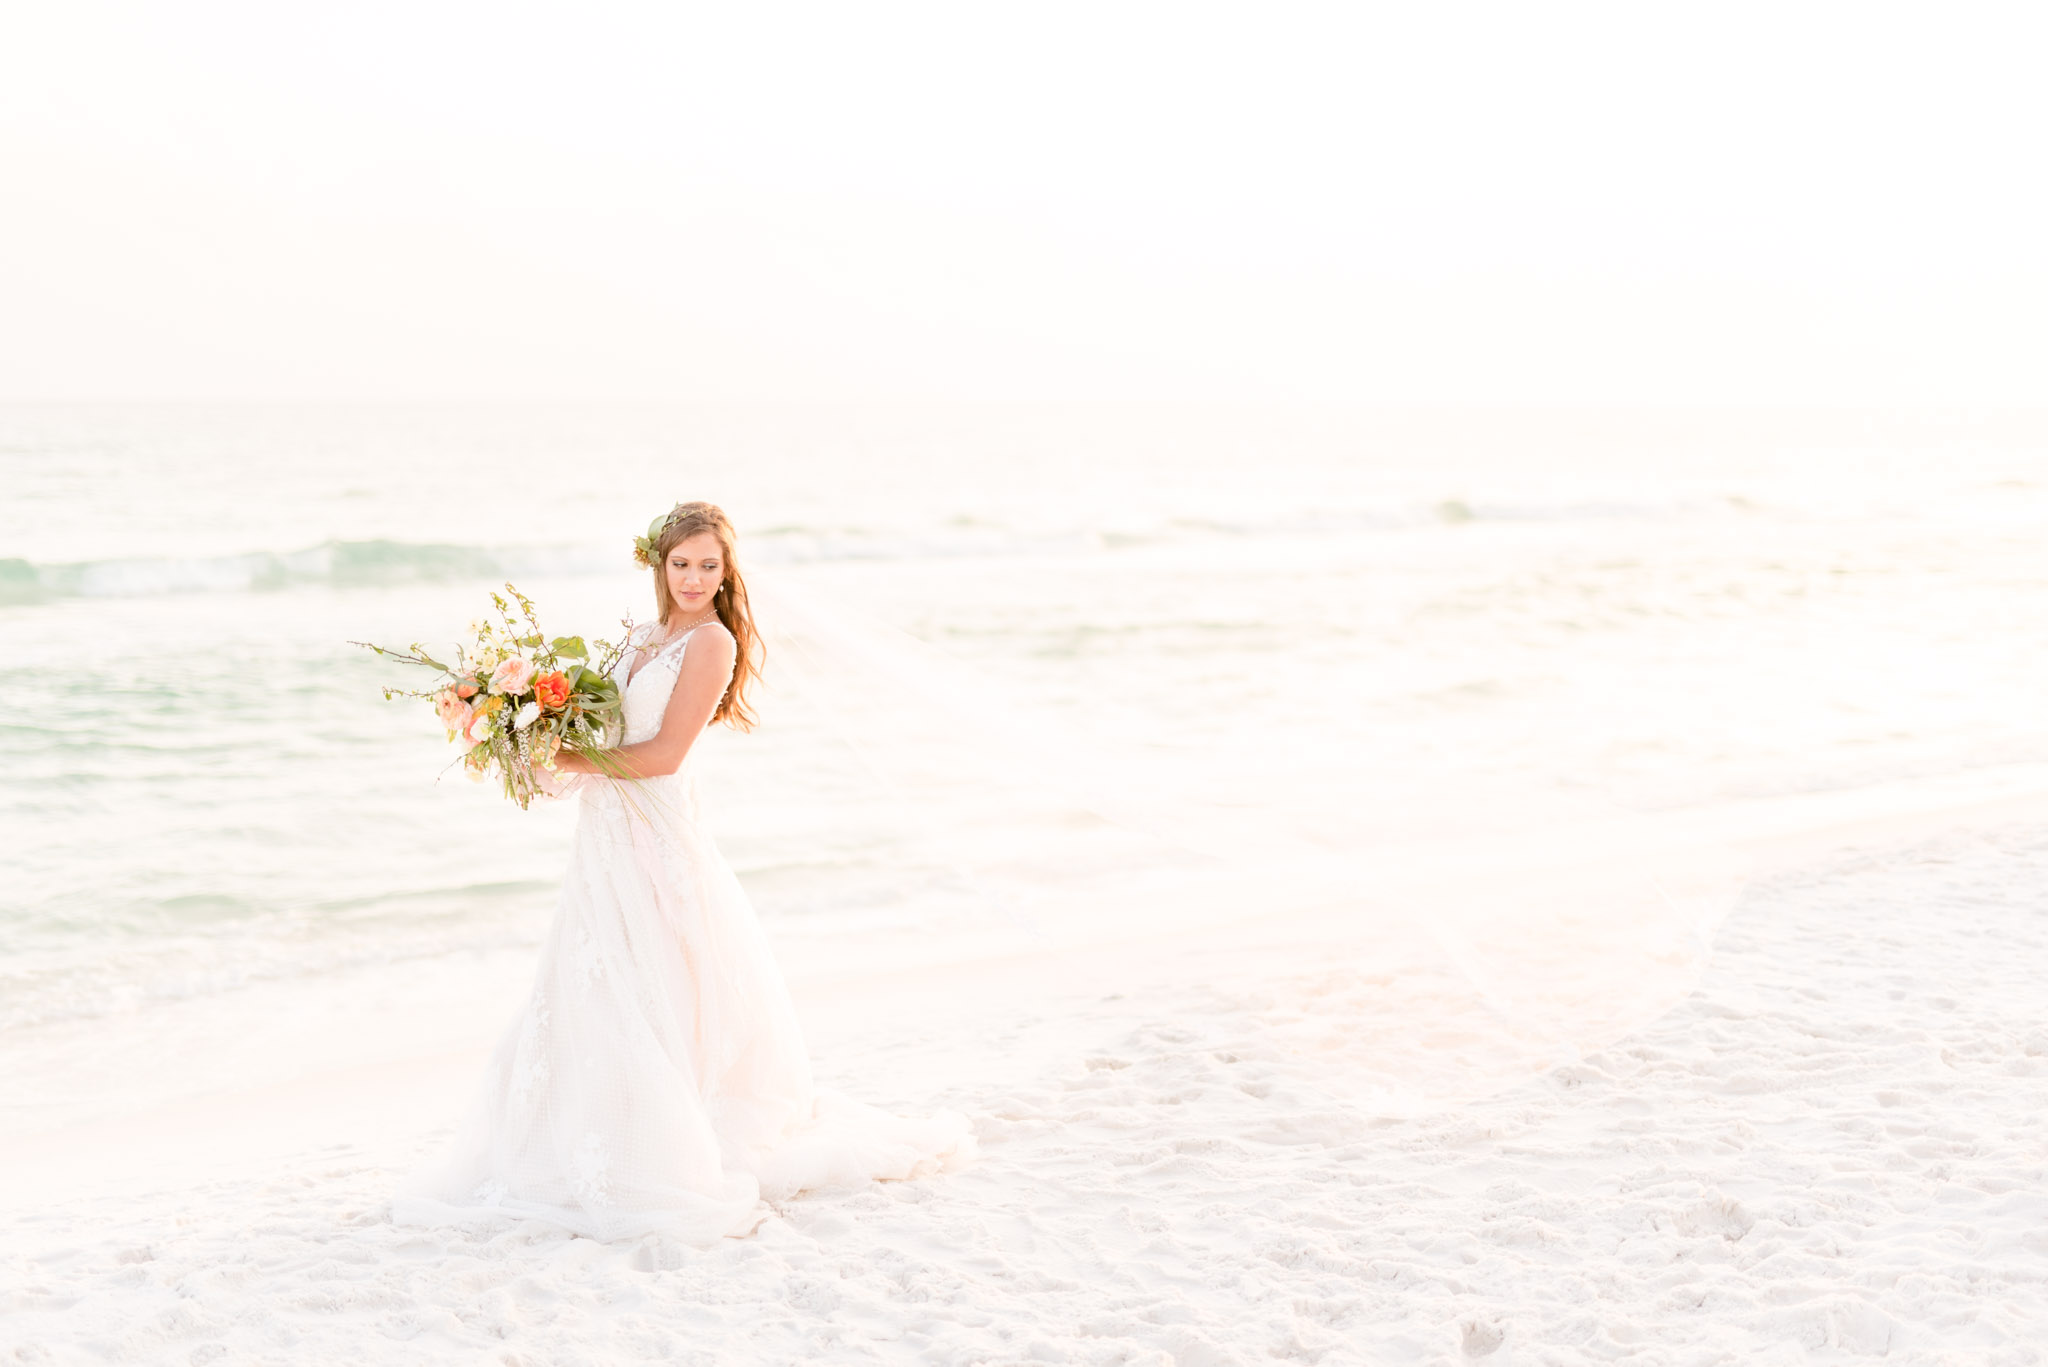 Bride looks over should as veil blows in the ocean breeze.